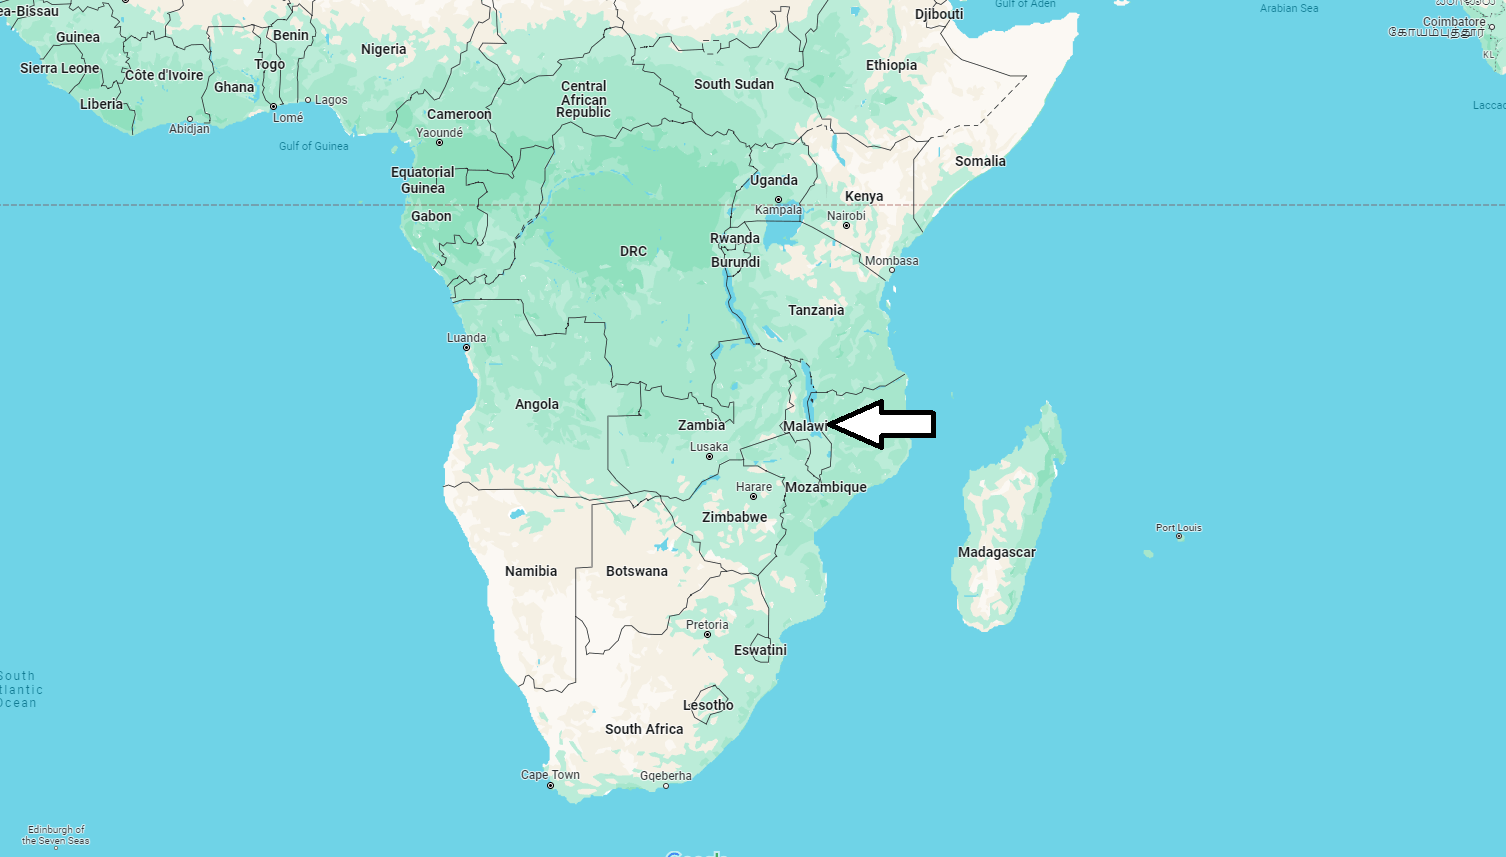 What Continent is Malawi in